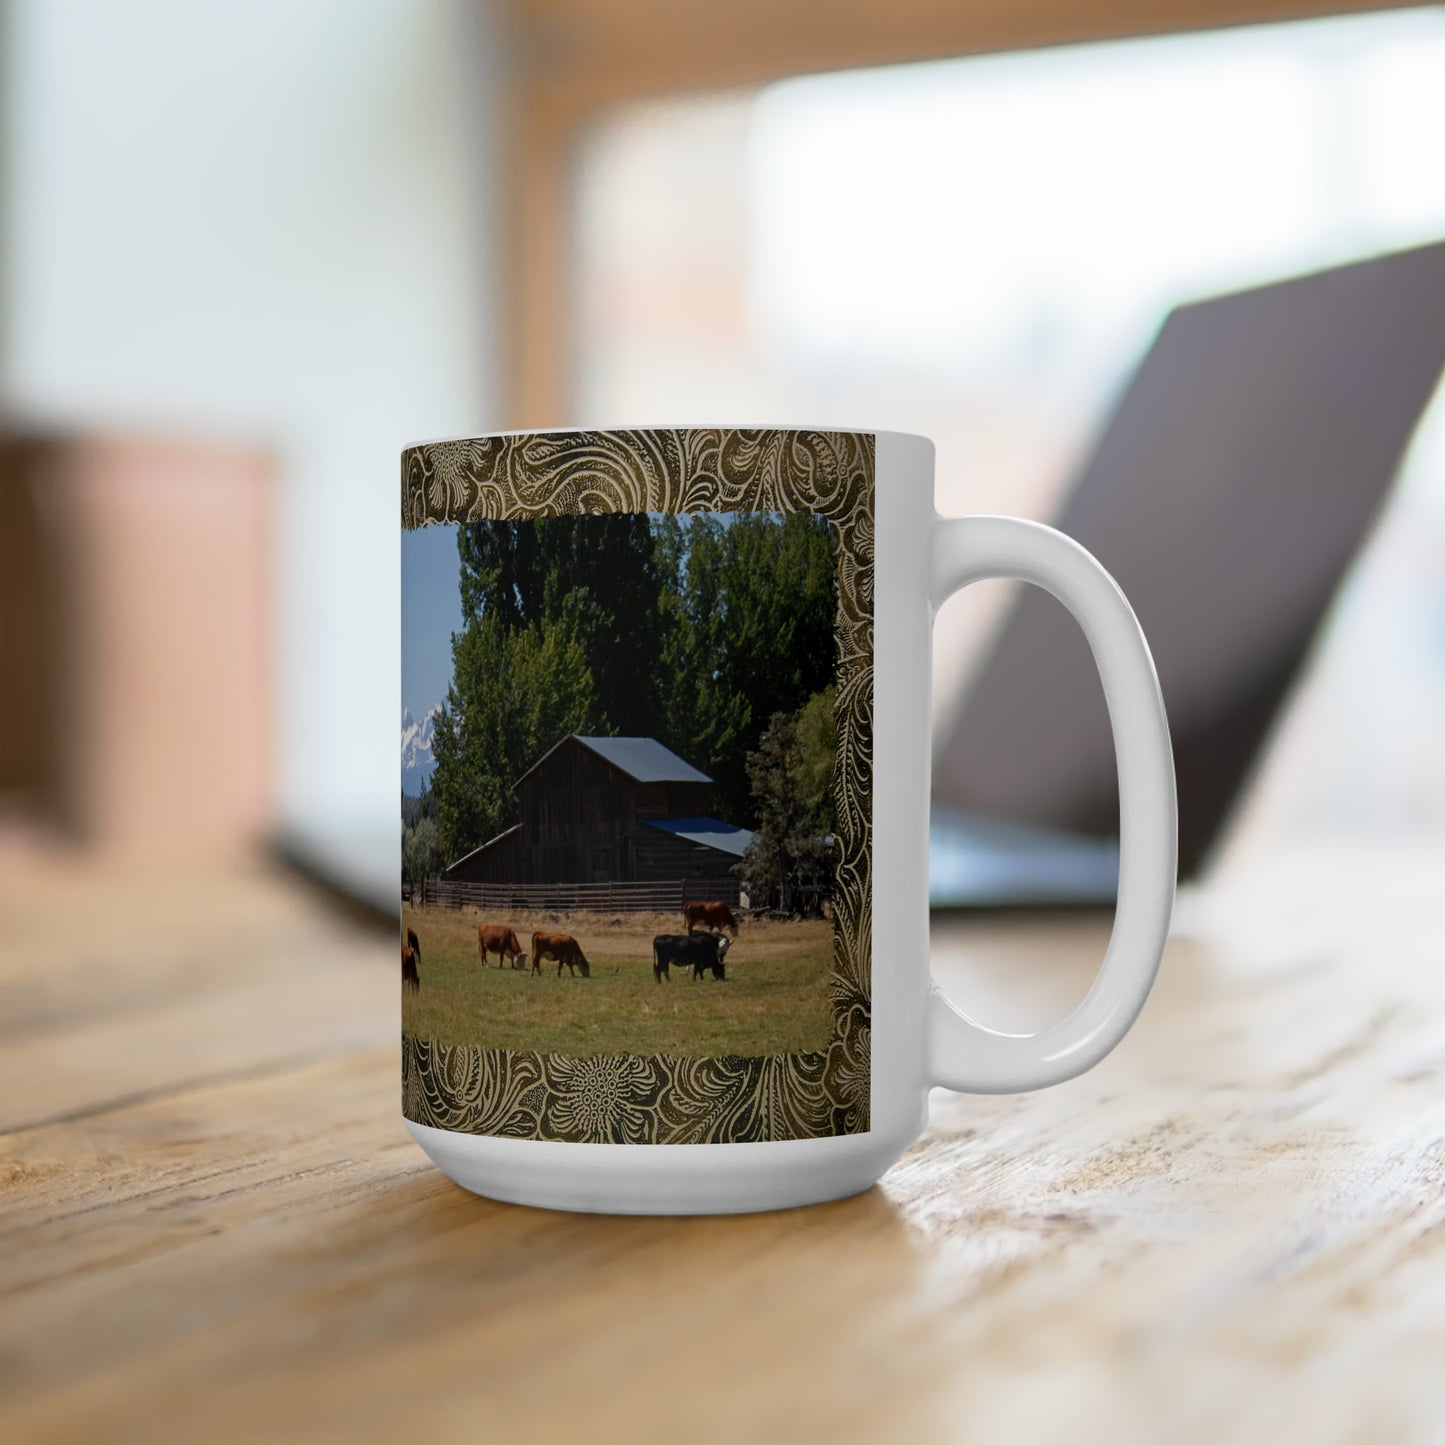 Picturesque Cattle with Leather Print Ceramic Mug 15oz